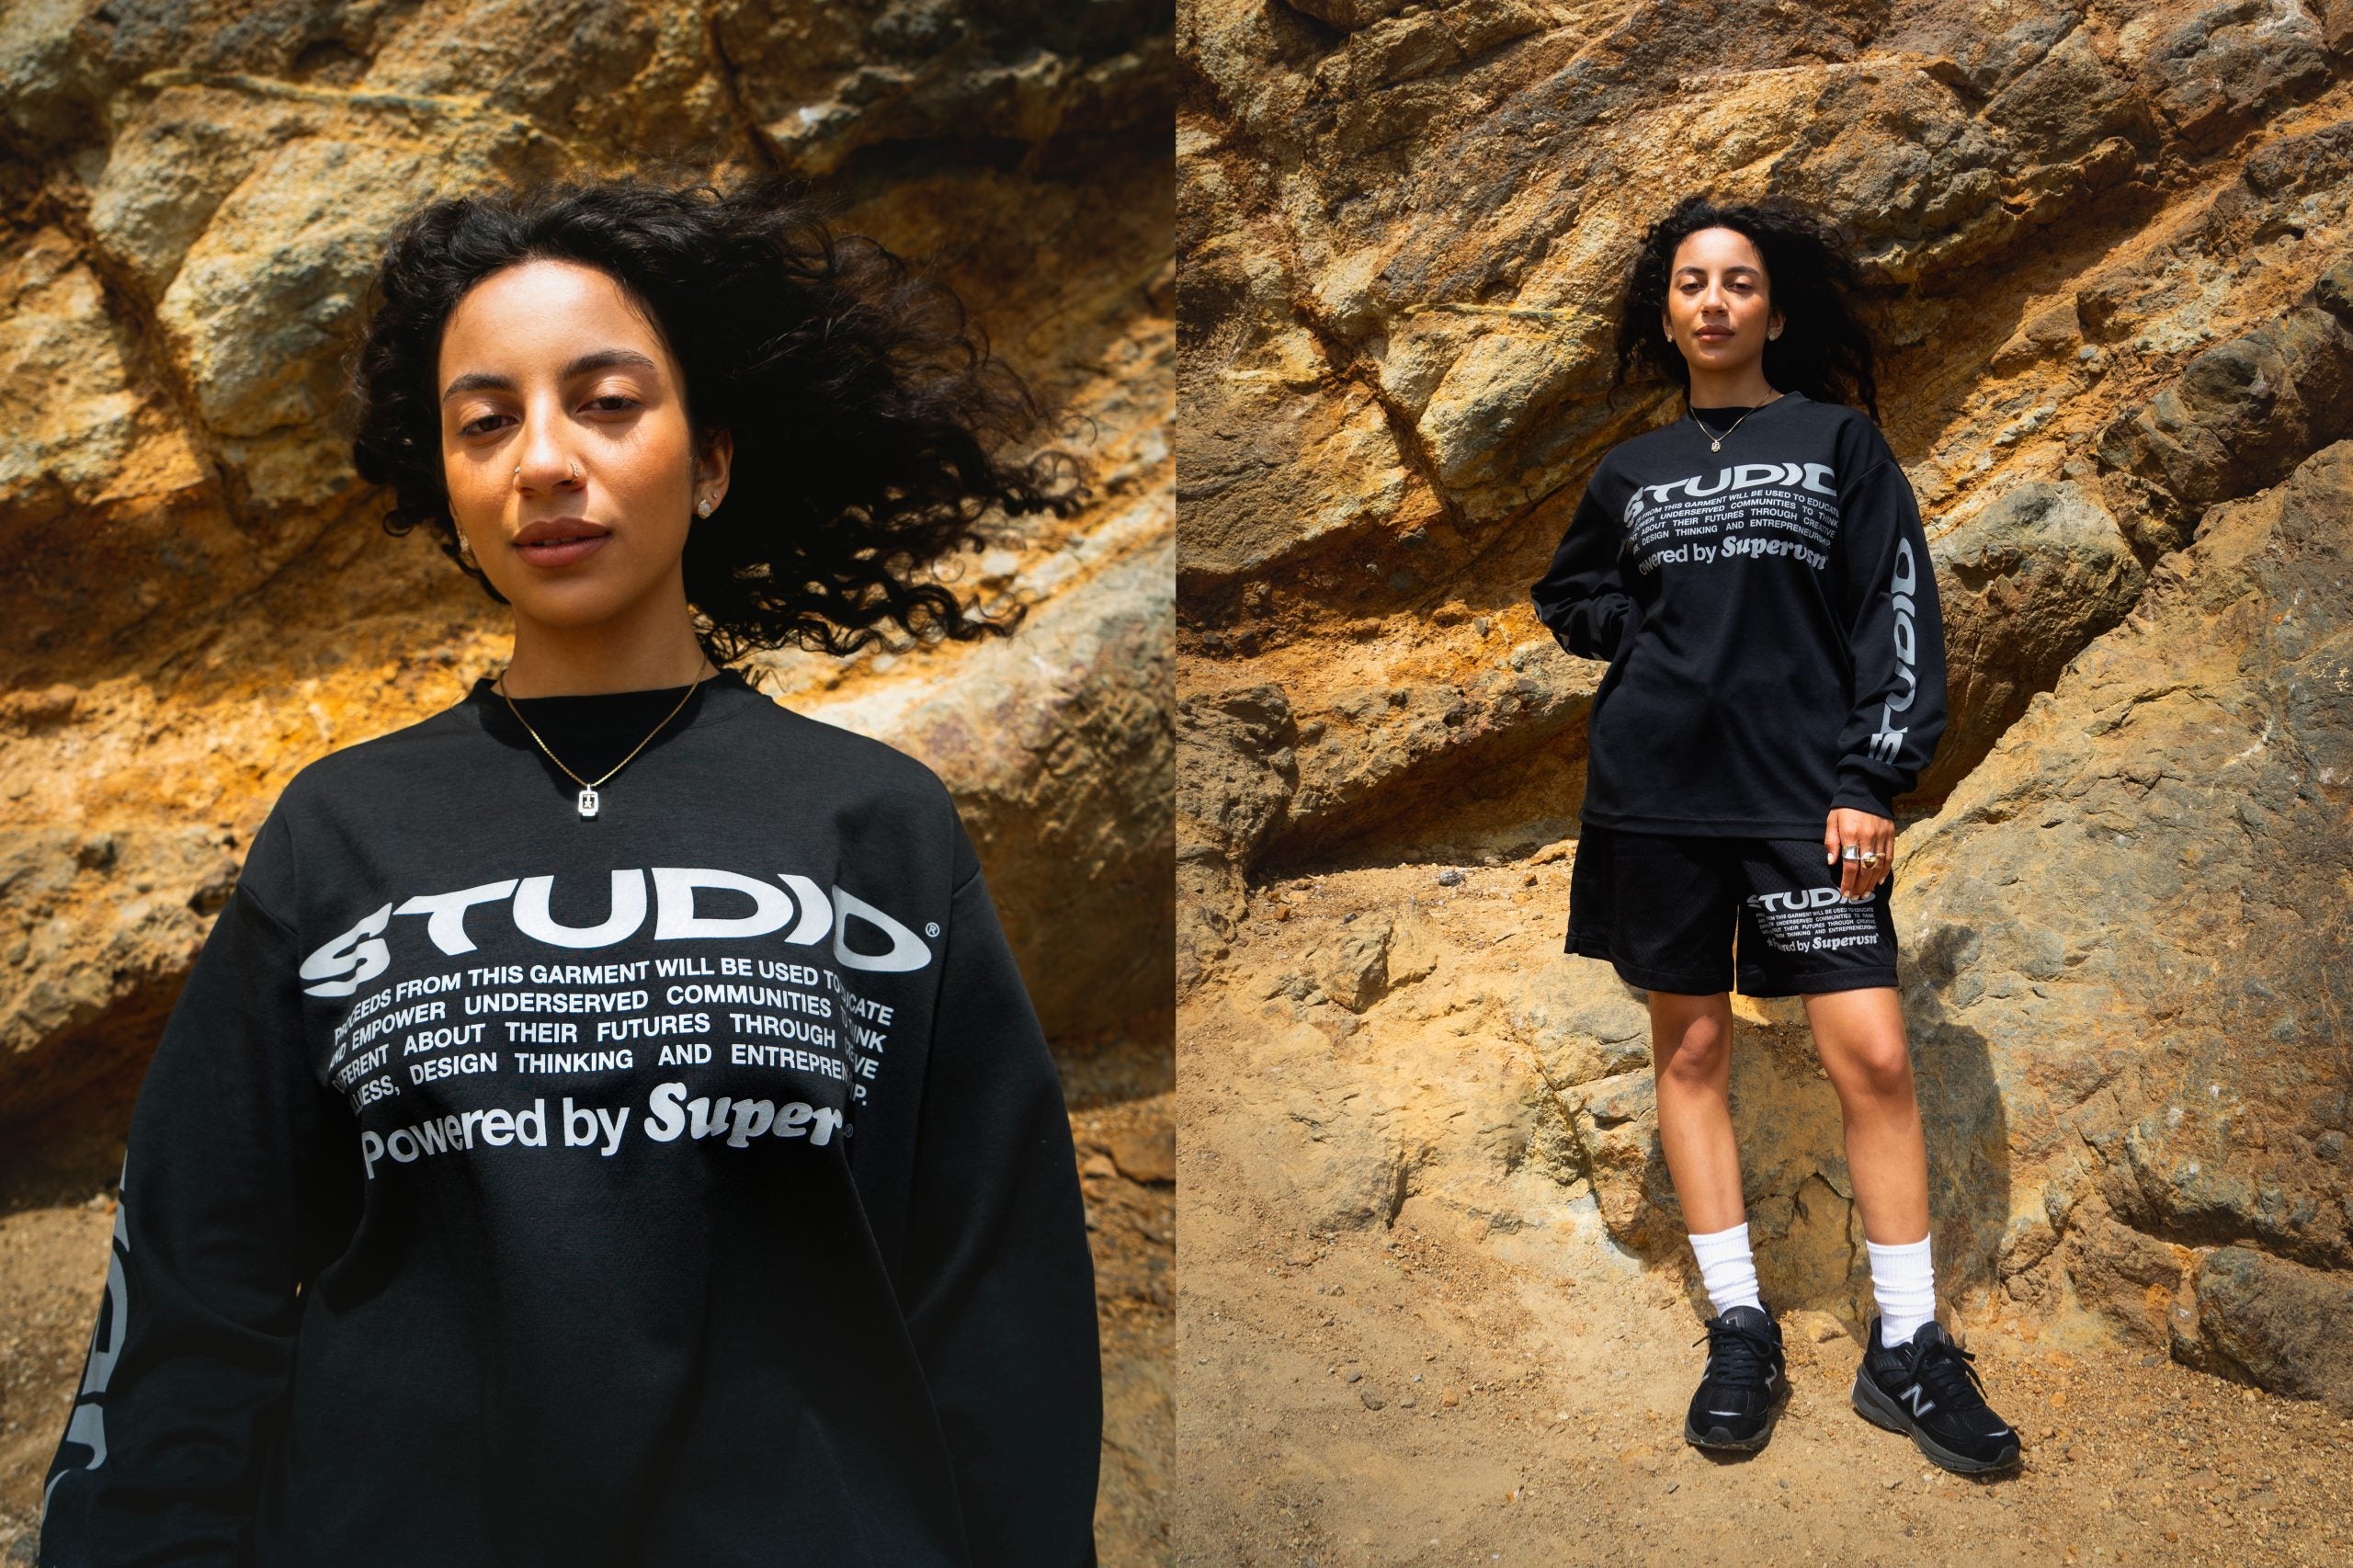 Supervsn Teams Up With Pacsun To Create Opportunity For Emerging ...